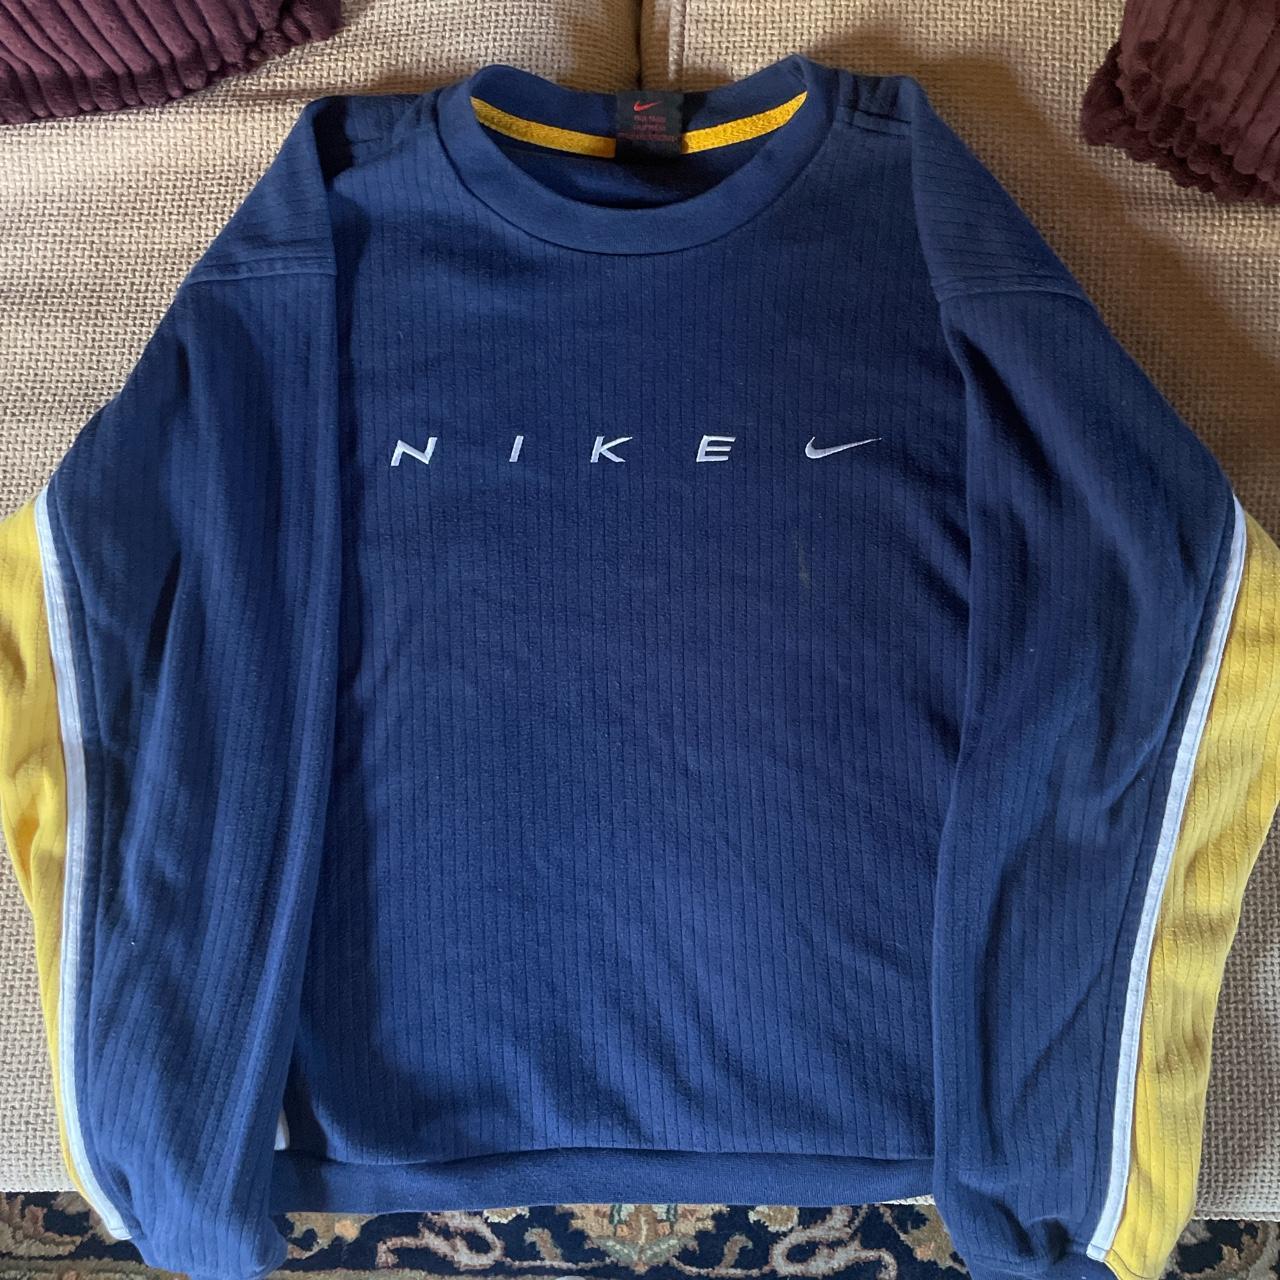 Vintage 90s nike sweater Navy with yellow... - Depop